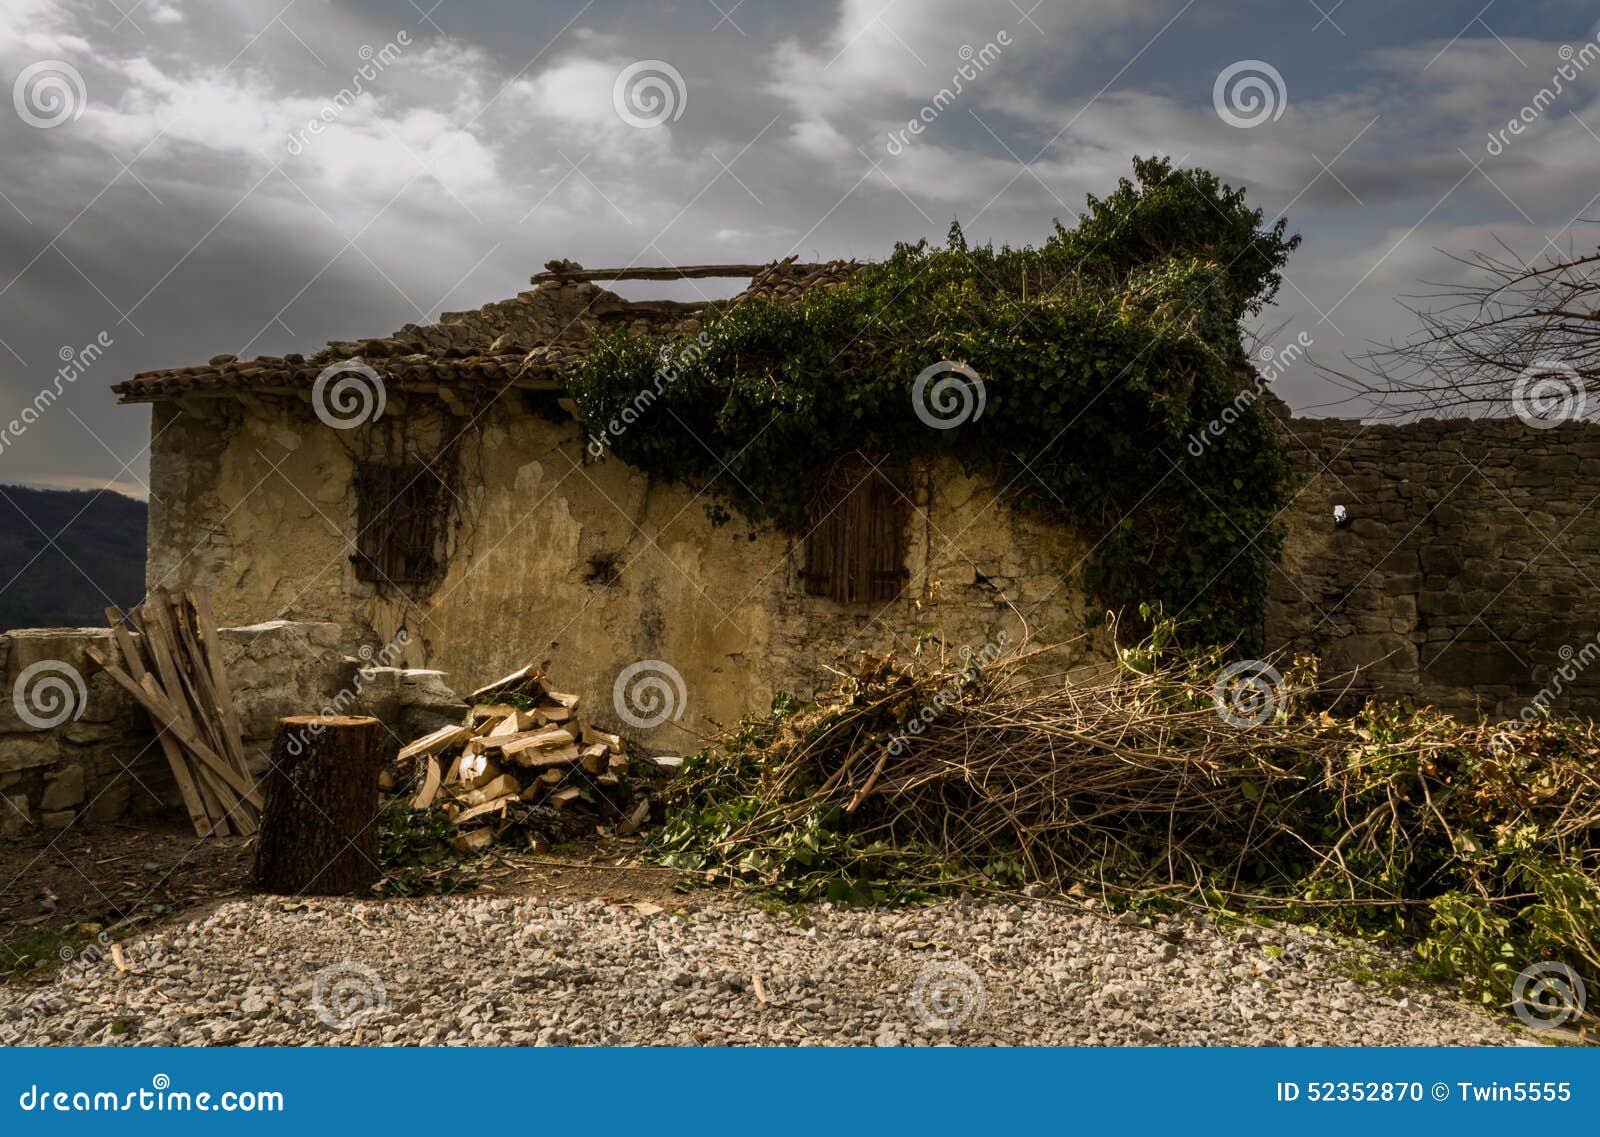 Old House, Hum stock photo. Image of town, photographed - 52352870